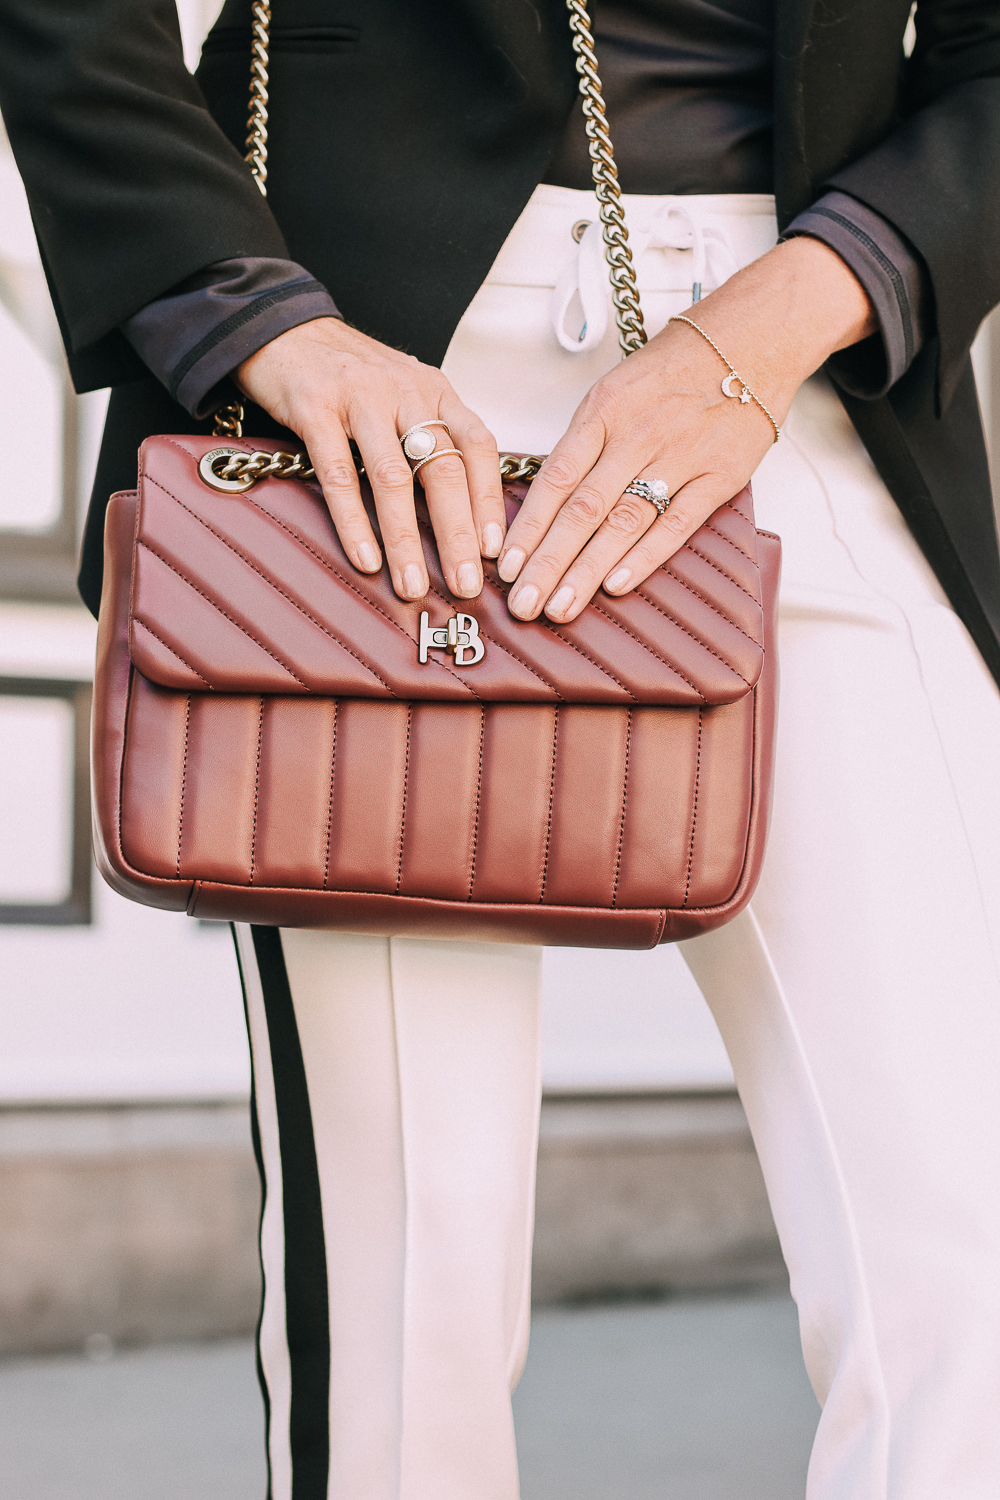 Henri Bendel quilted crossbody bag in burgundy with gold chain link detail